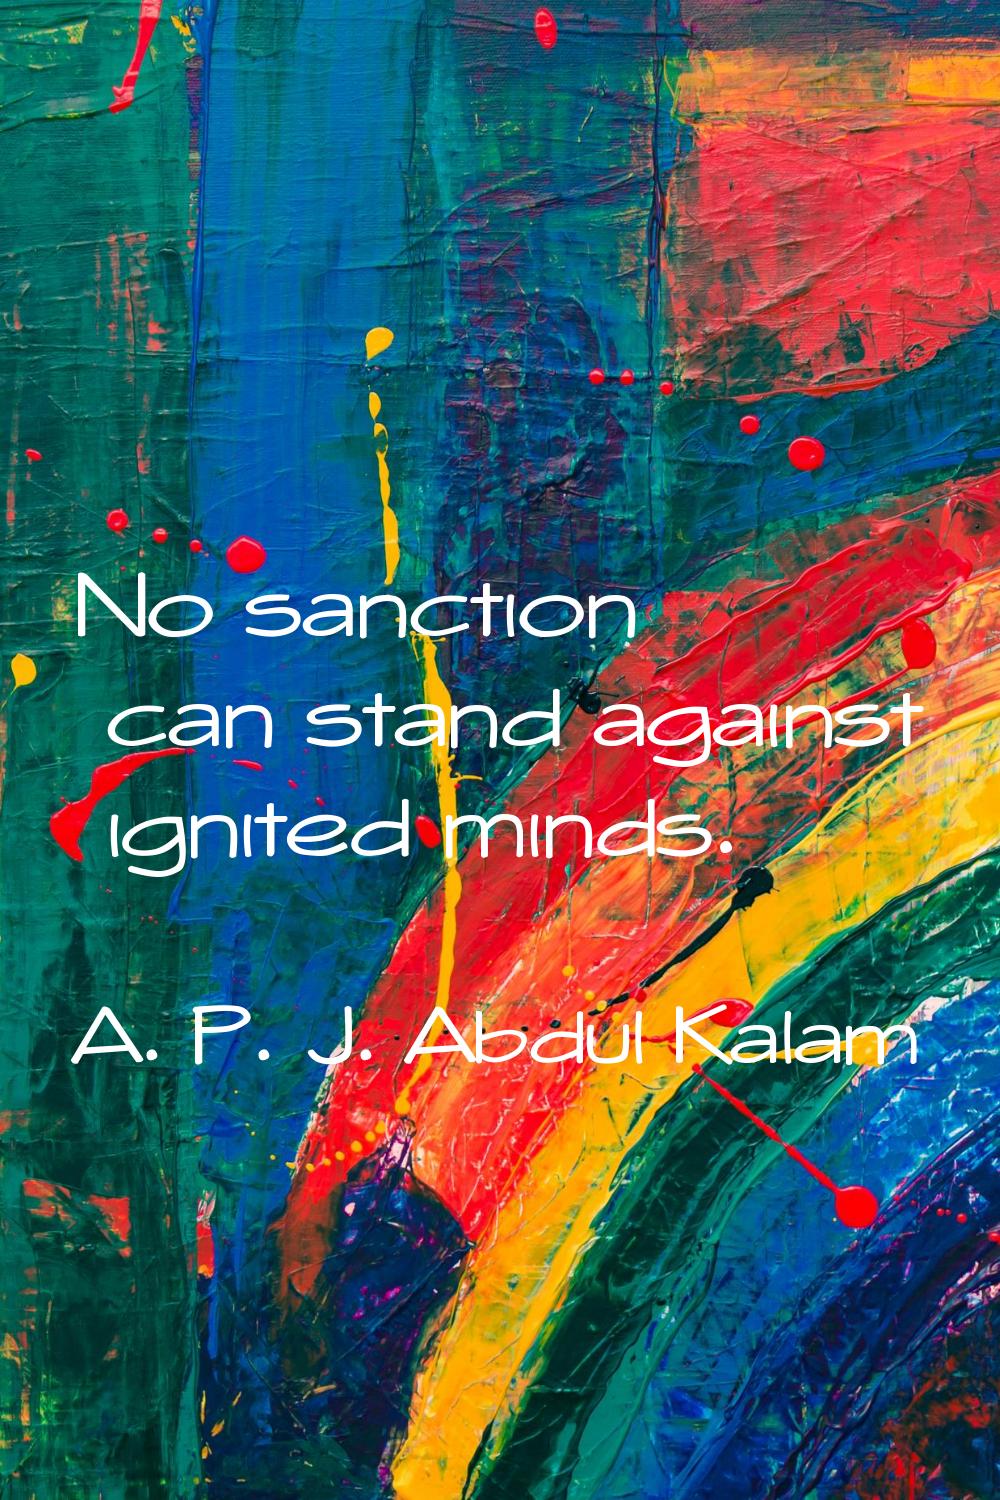 No sanction can stand against ignited minds.